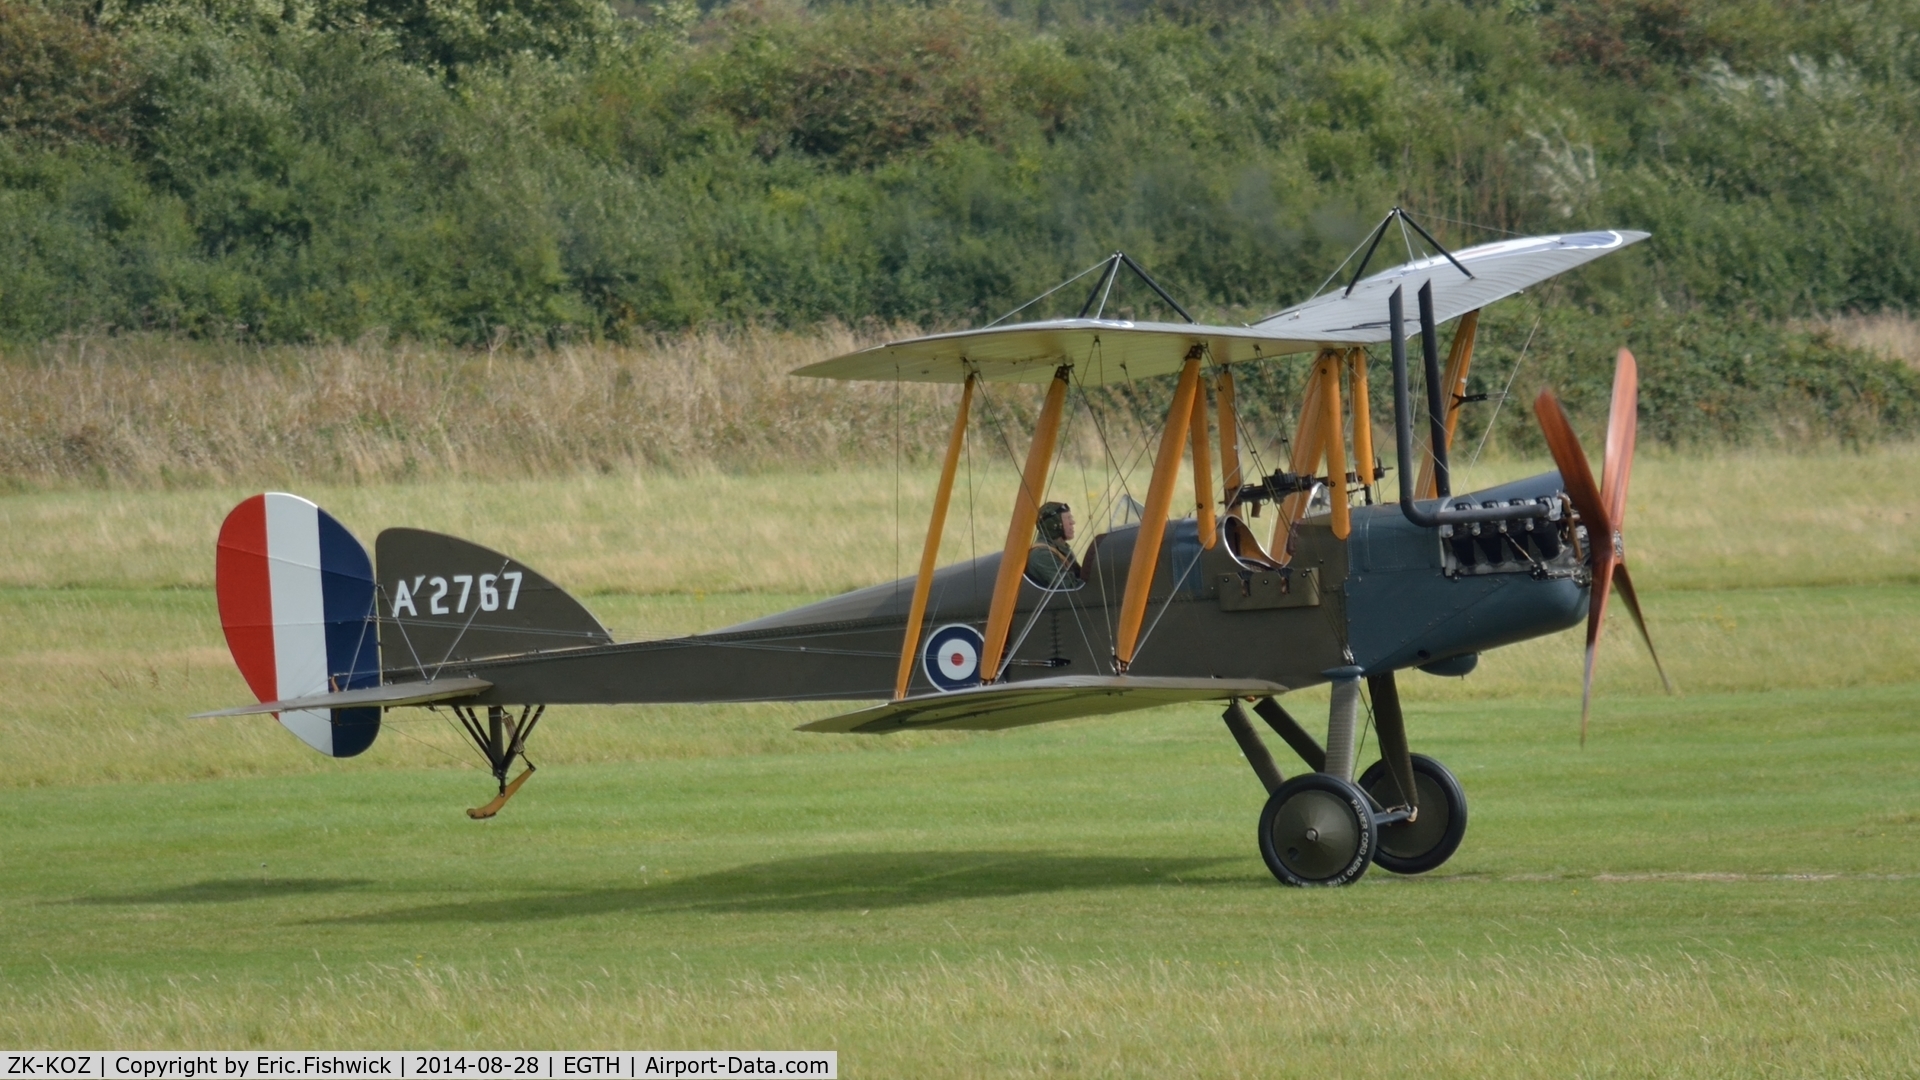 ZK-KOZ, 2014 Royal Aircraft Factory BE-2e Replica C/N 752, 3. ZK-KOZ (A'2767) preparing to depart The Shuttleworth Collection.